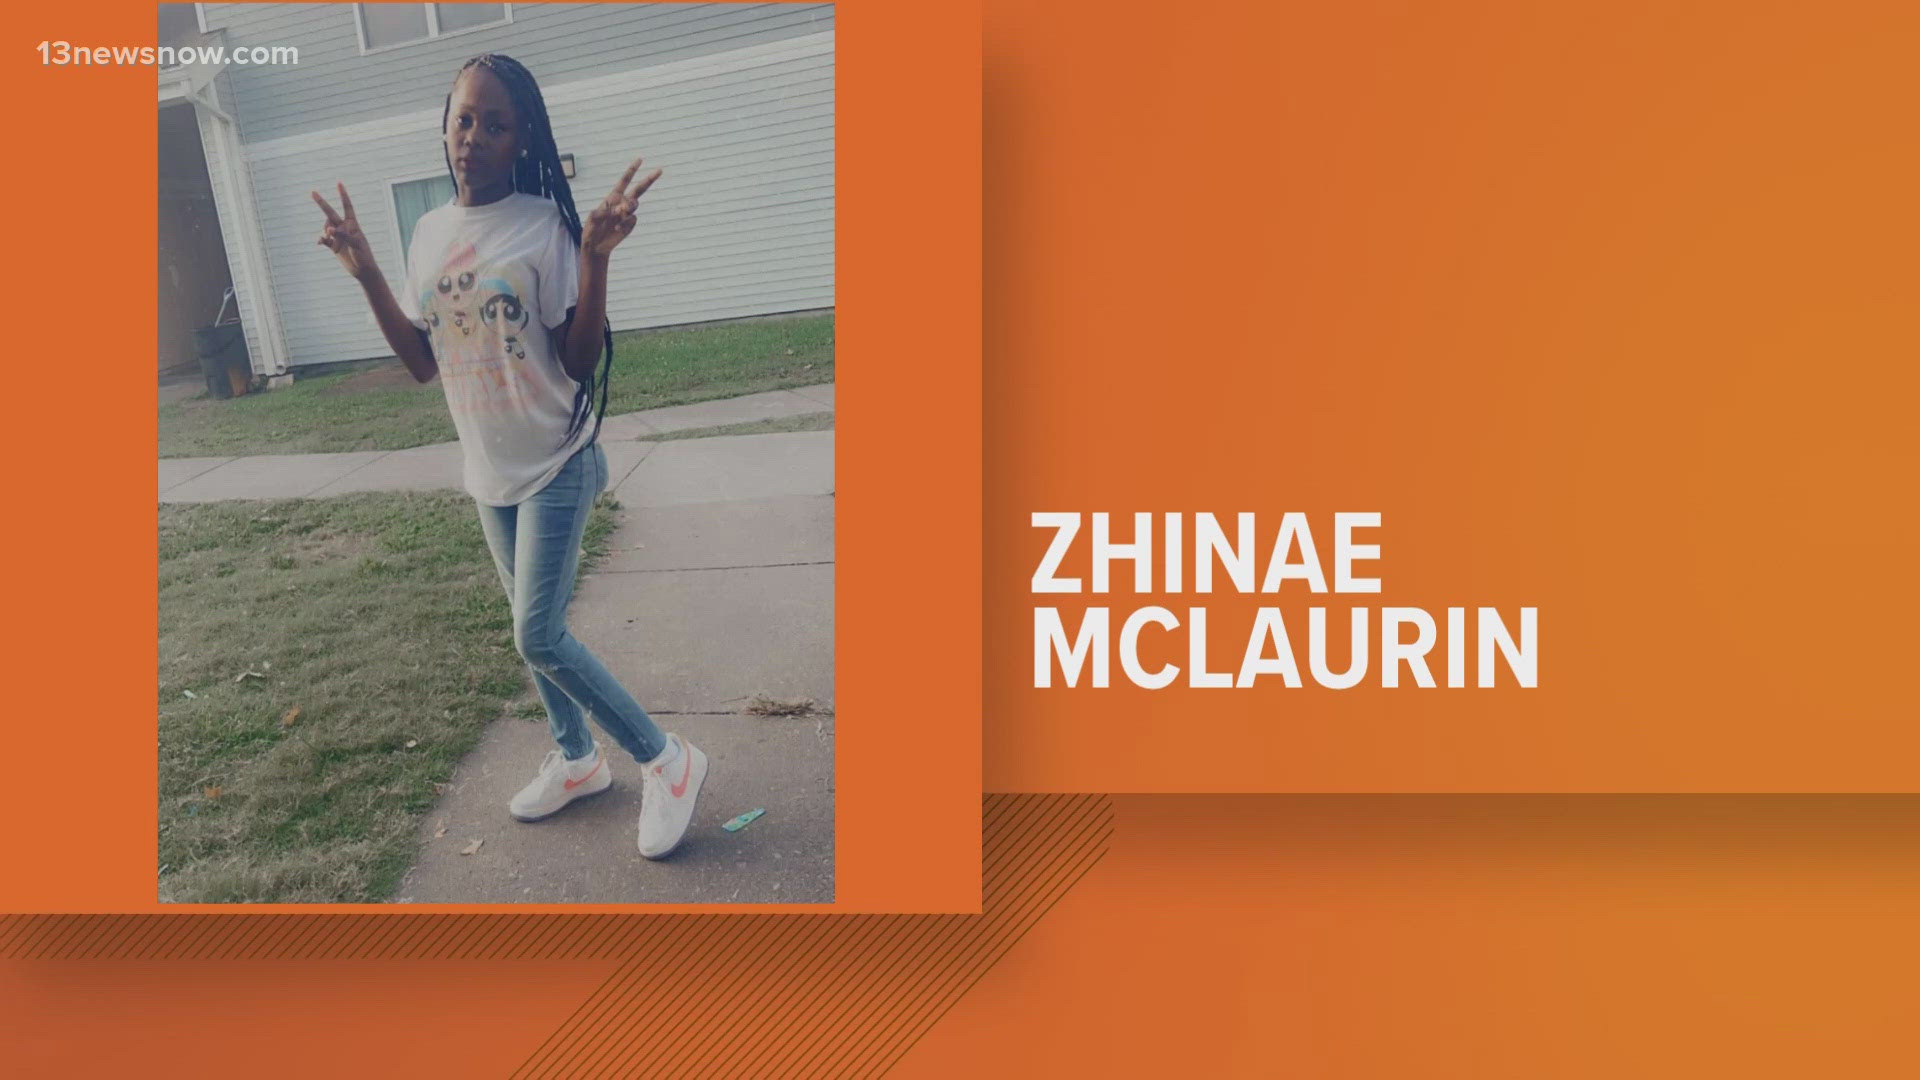 Anyone who sees Zhinae McLaurin is urged to call Portsmouth police.